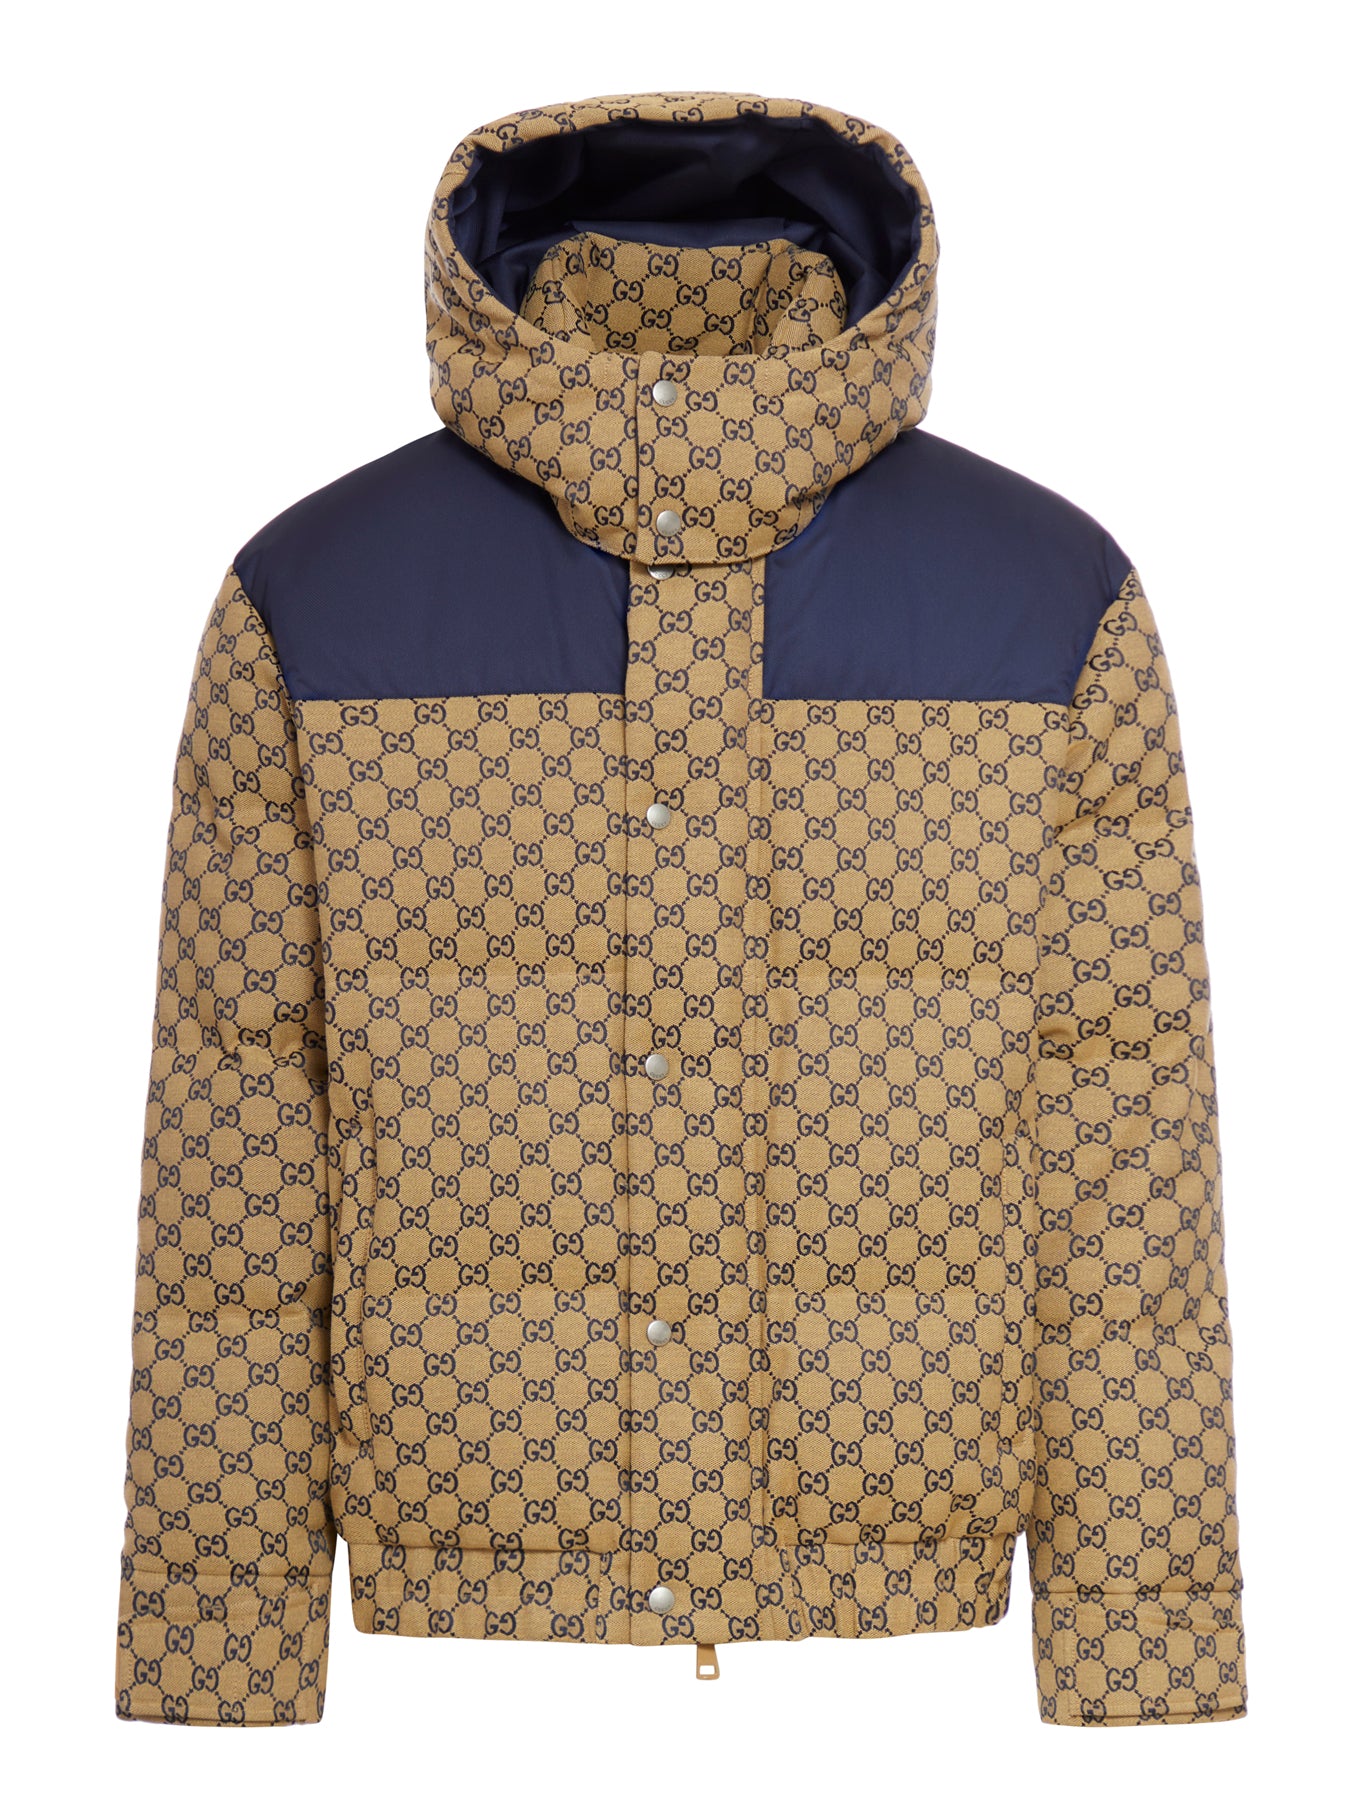 PADDED JACKET IN GG FABRIC